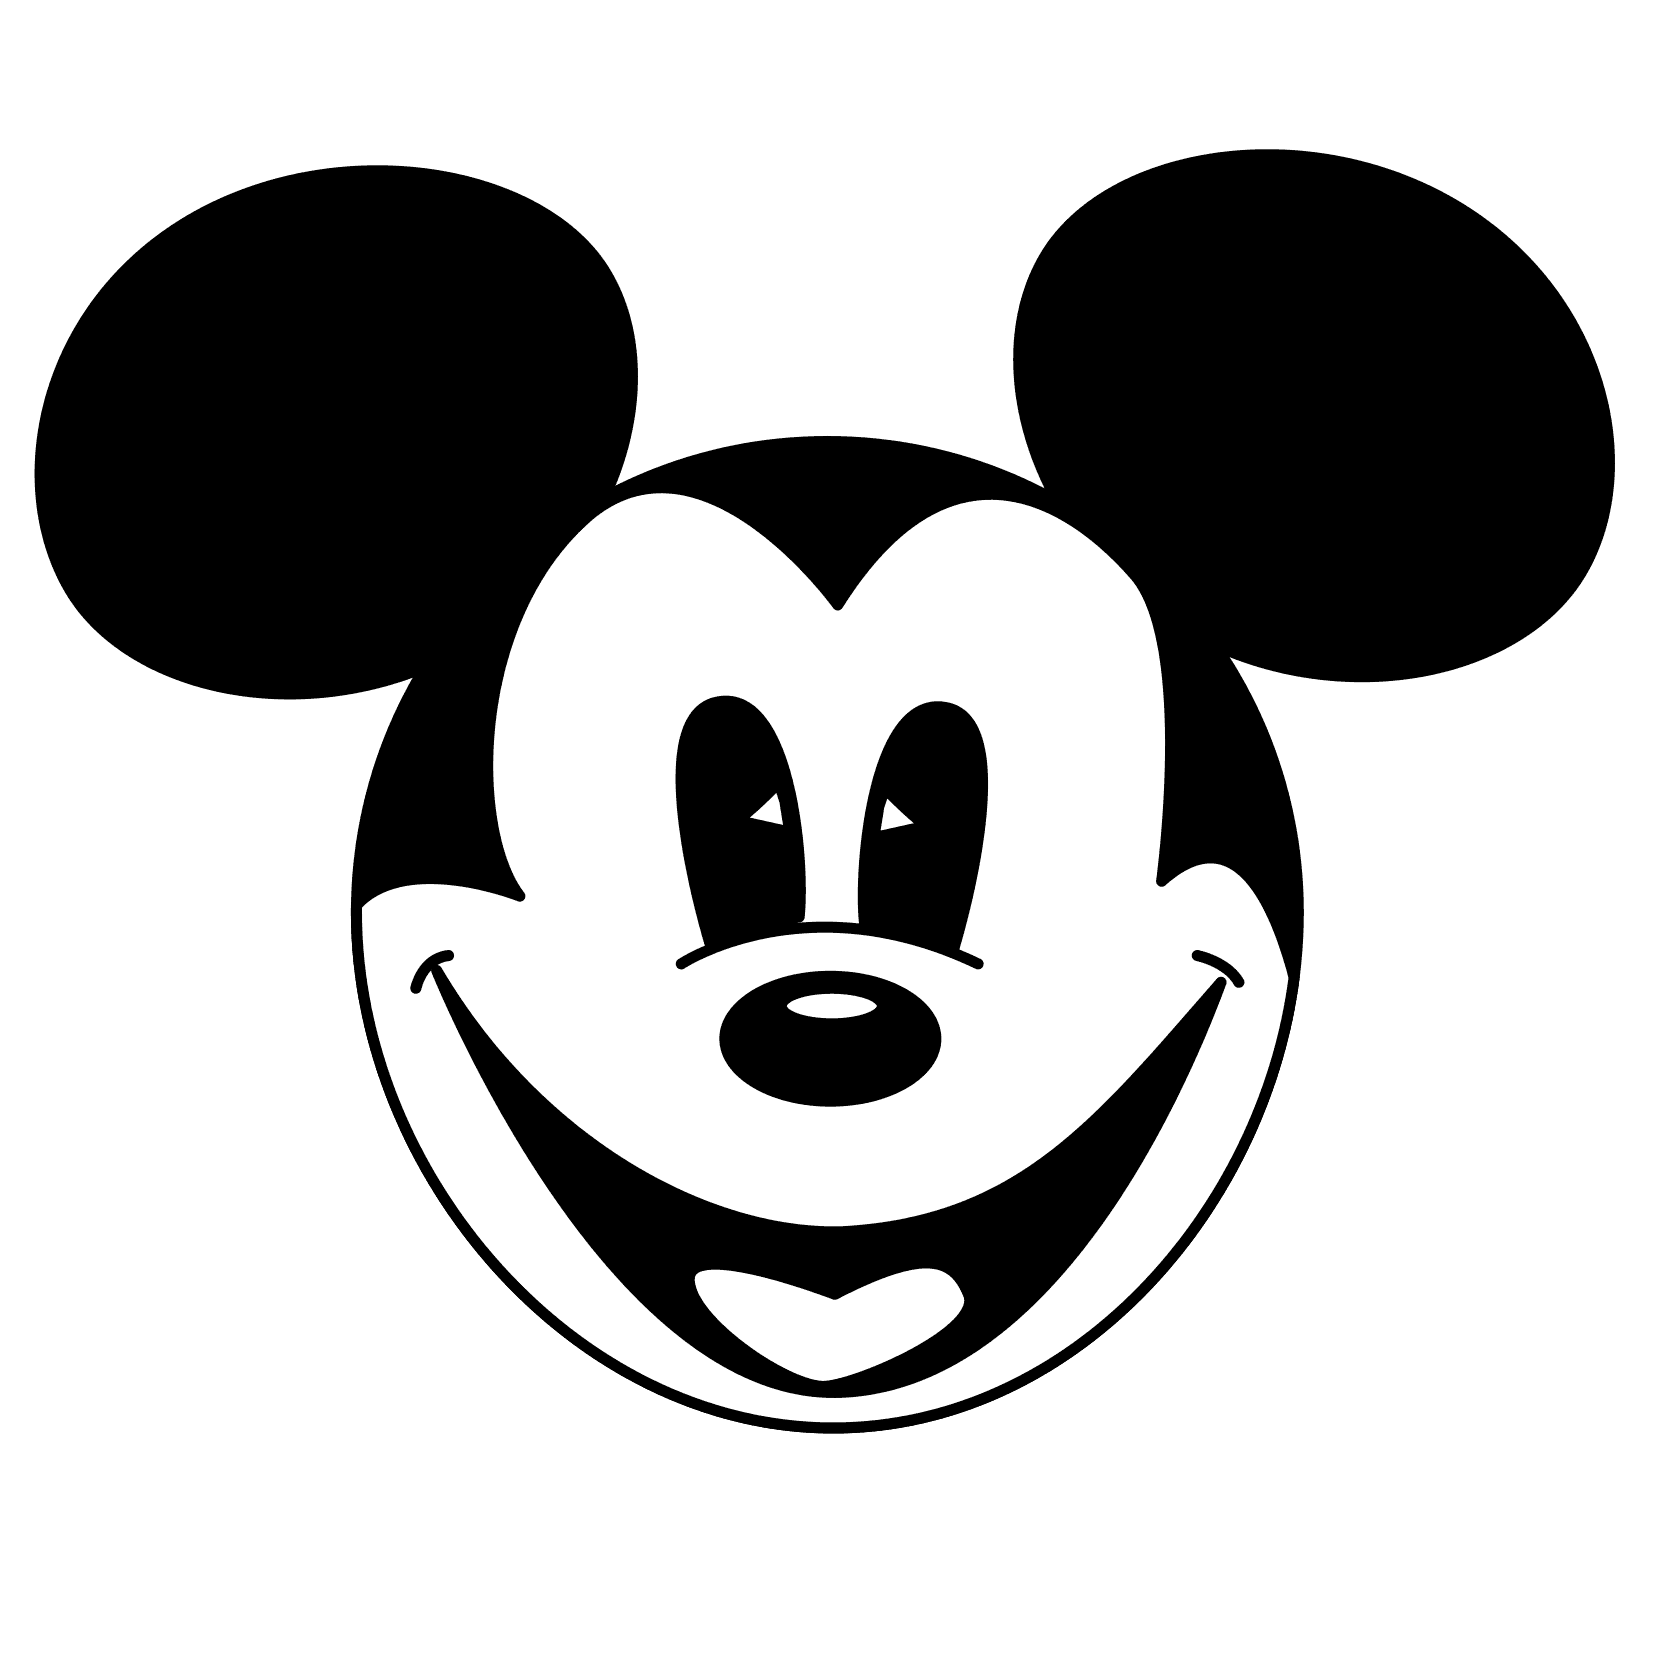 Mickey mouse head black and white clipart